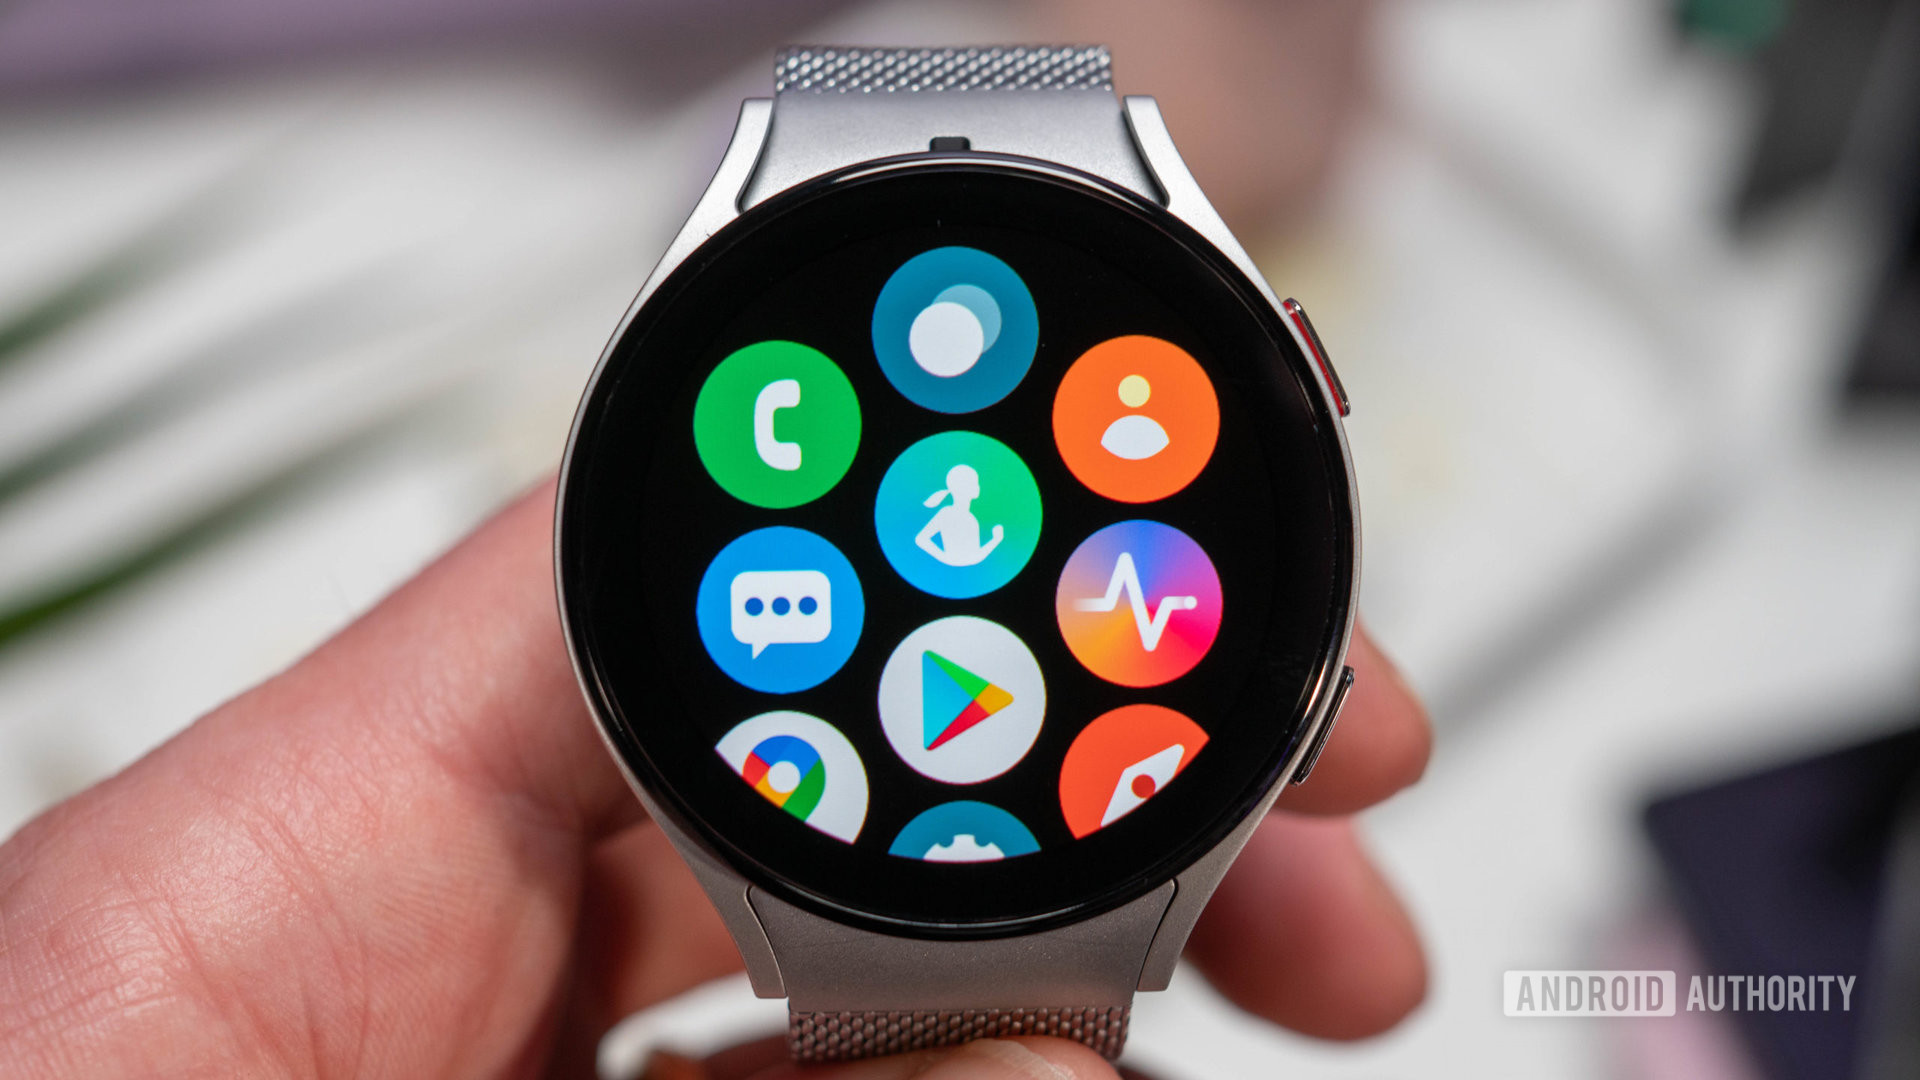 Samsung Galaxy Watch 5 in silver color with metal bracelet in hand showing apps closeup